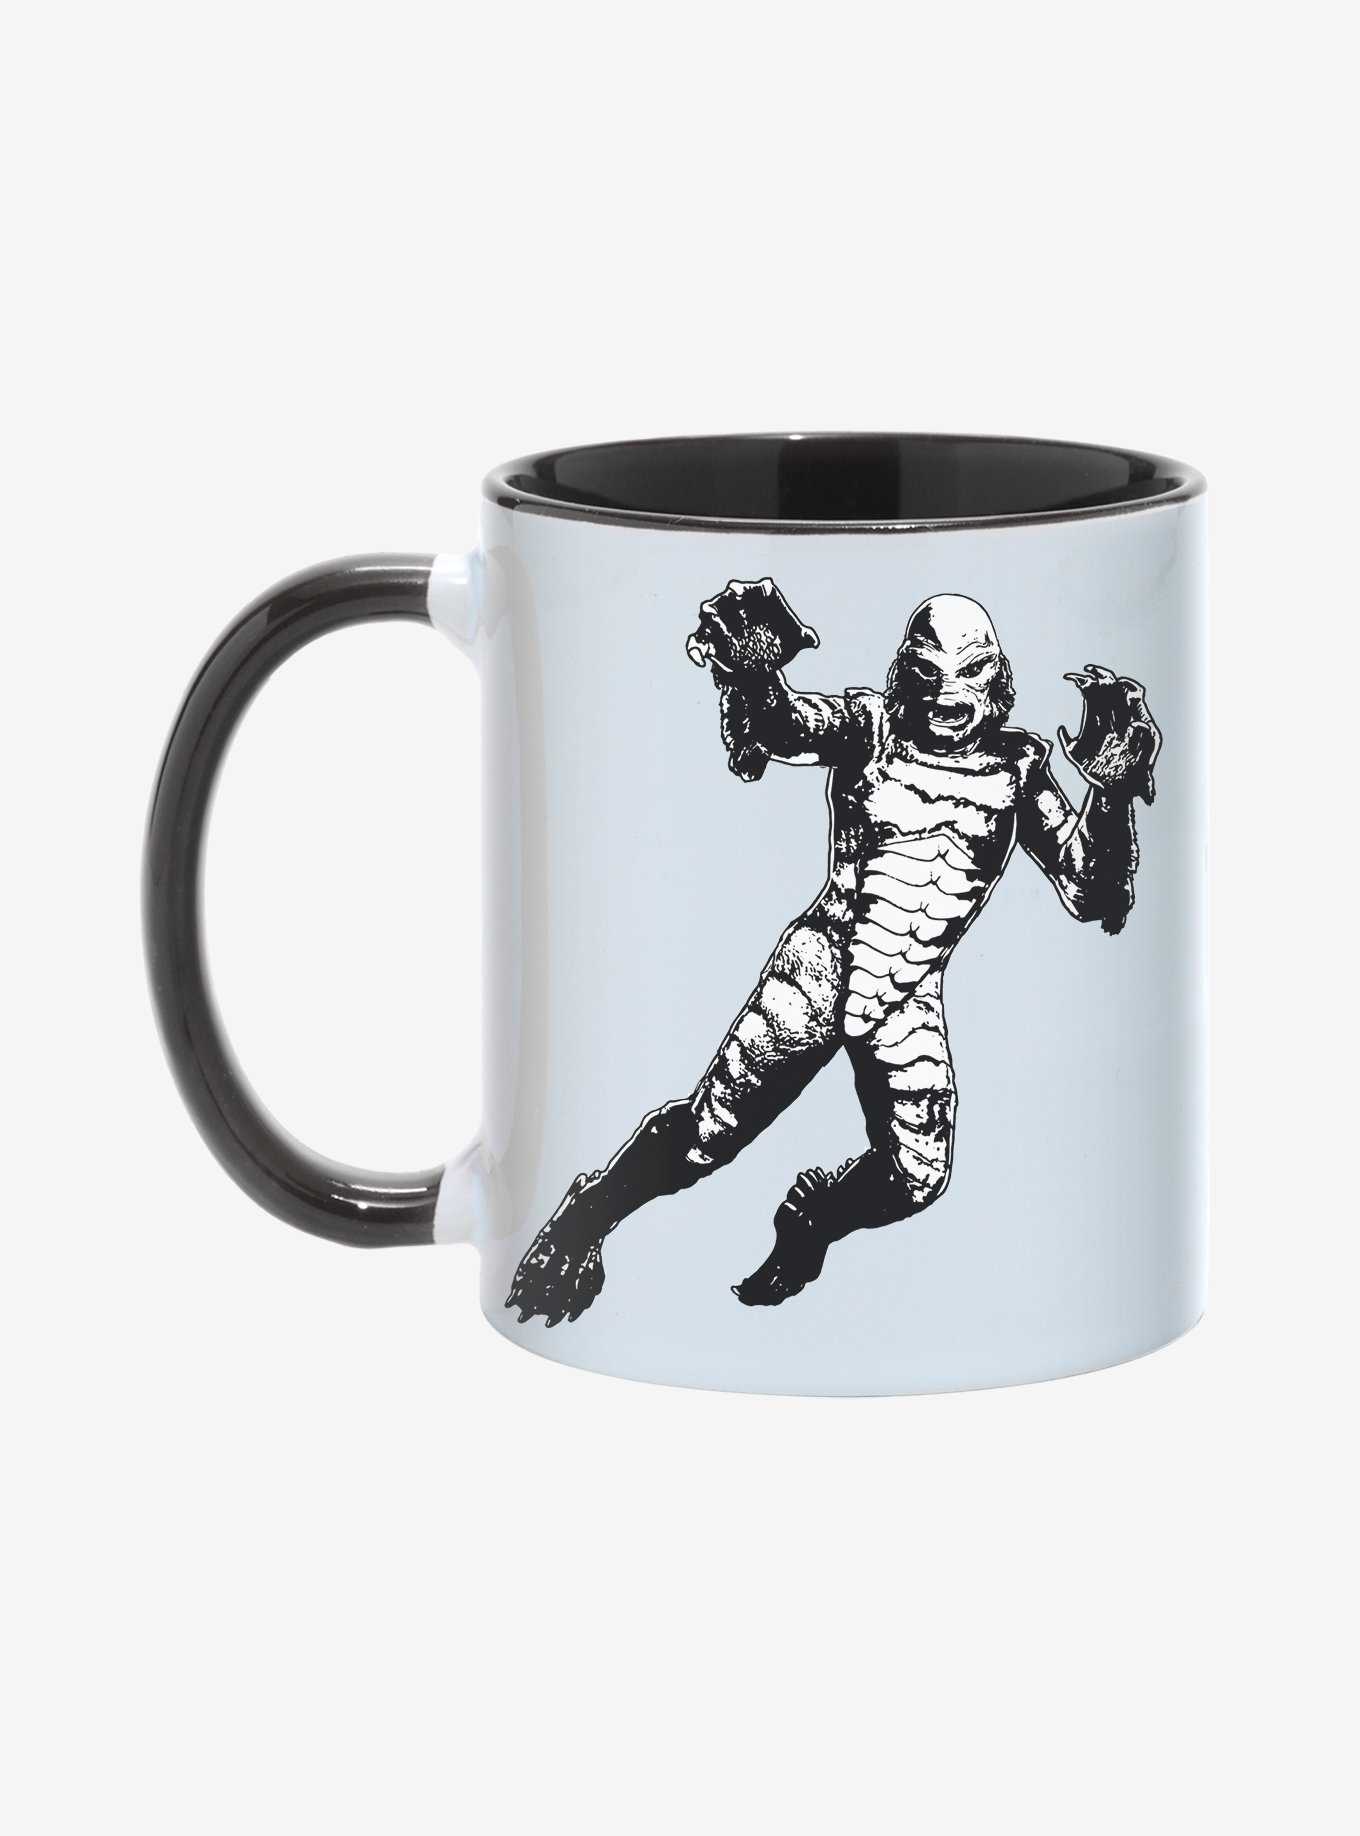 Universal Monsters Creature from the Black Lagoon Portrait Mug, , hi-res